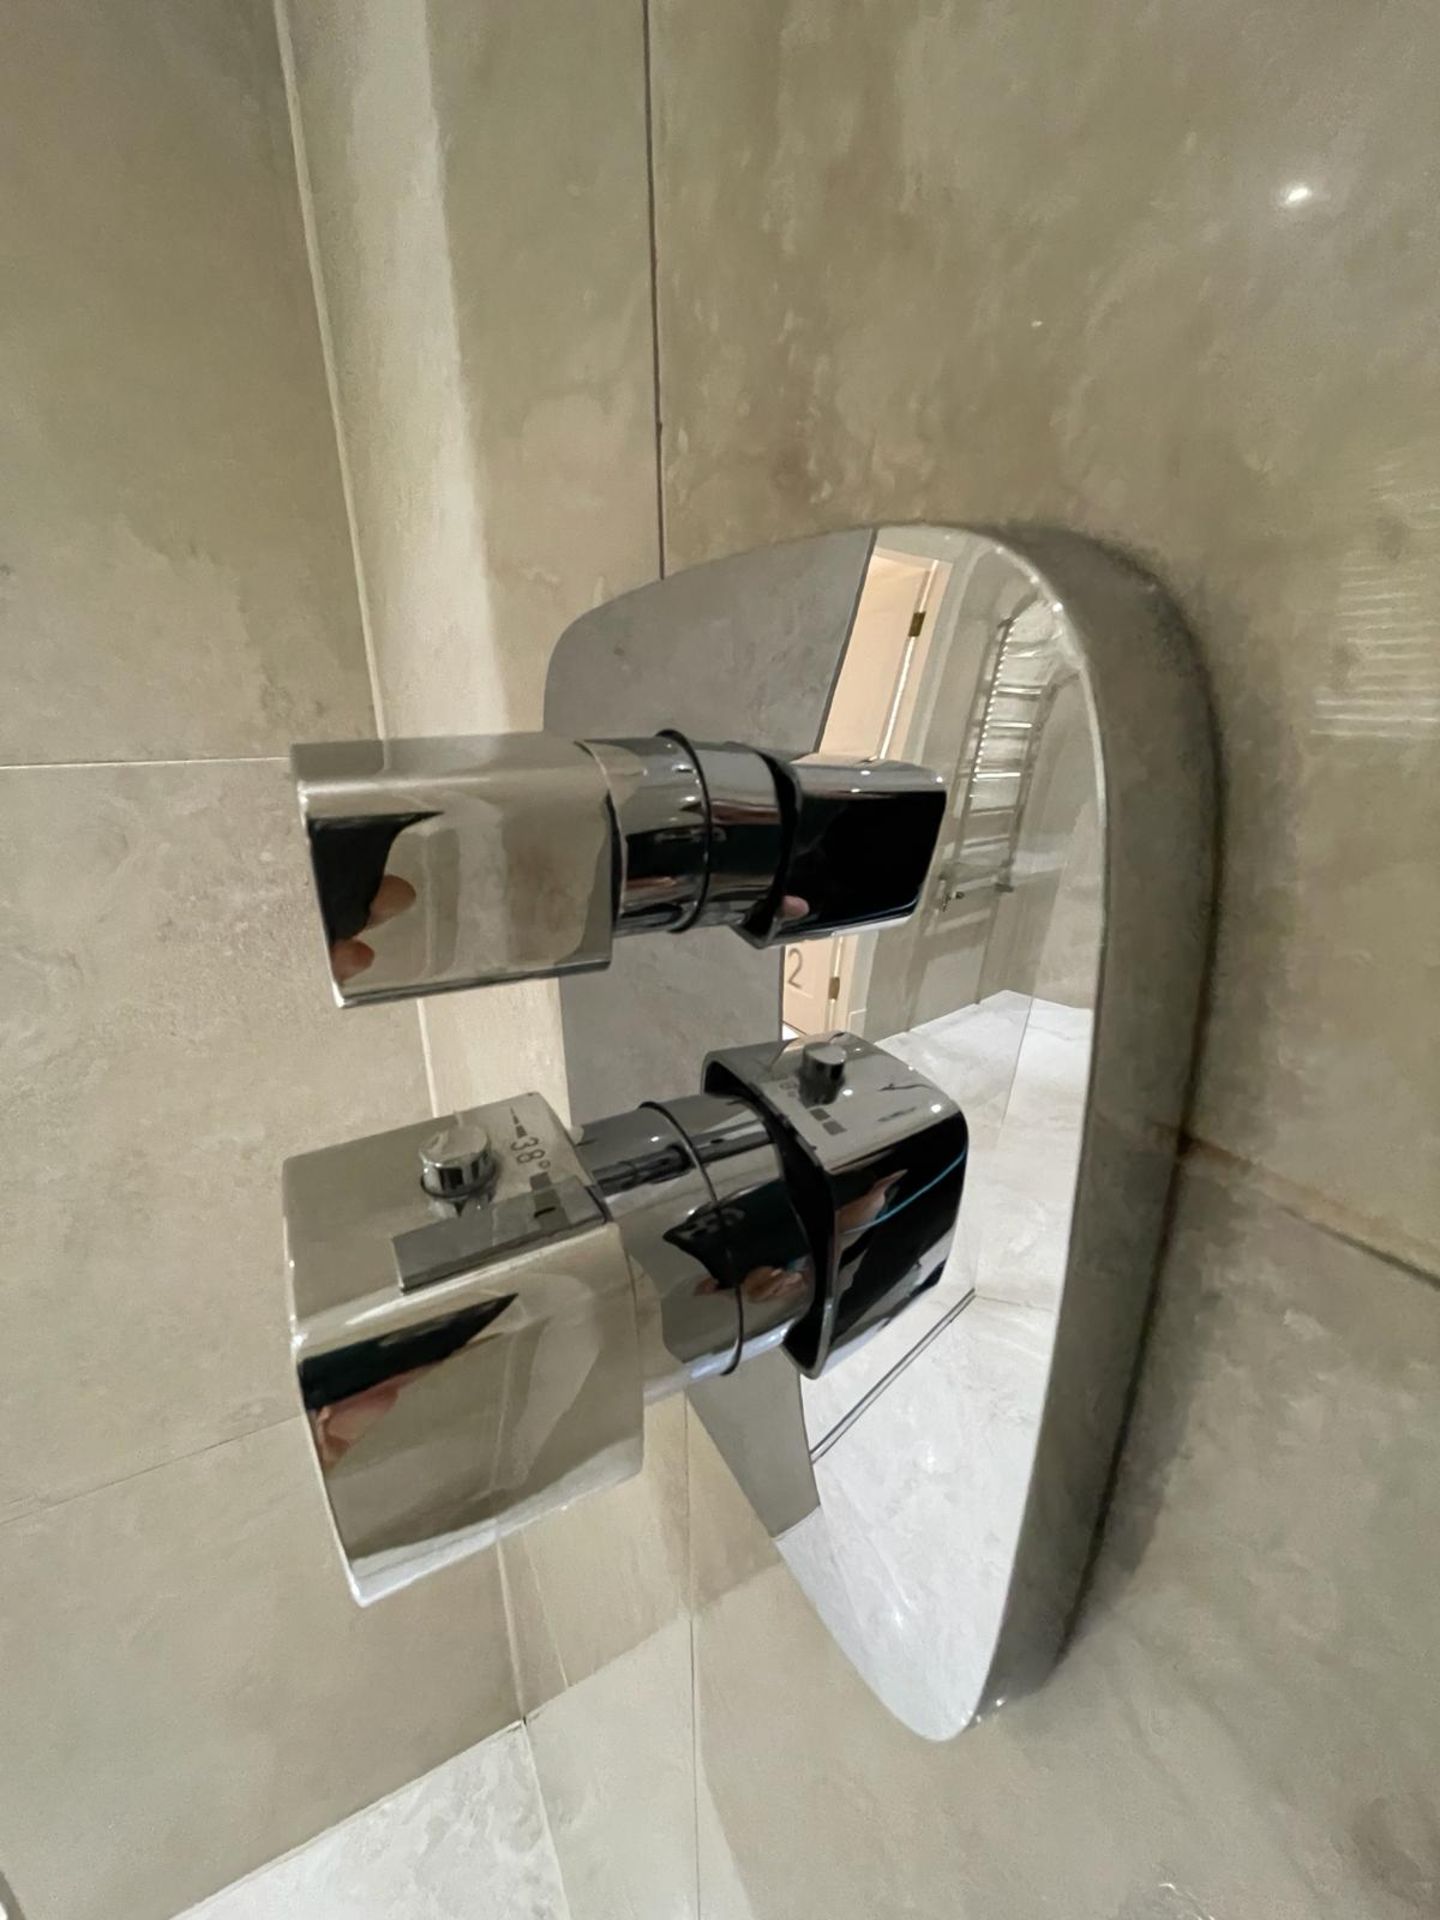 1 x Premium Shower and Enclosure + hansgrohe Controls and Thermostat - Ref: PAN251 / Bed2bth - CL896 - Image 6 of 15